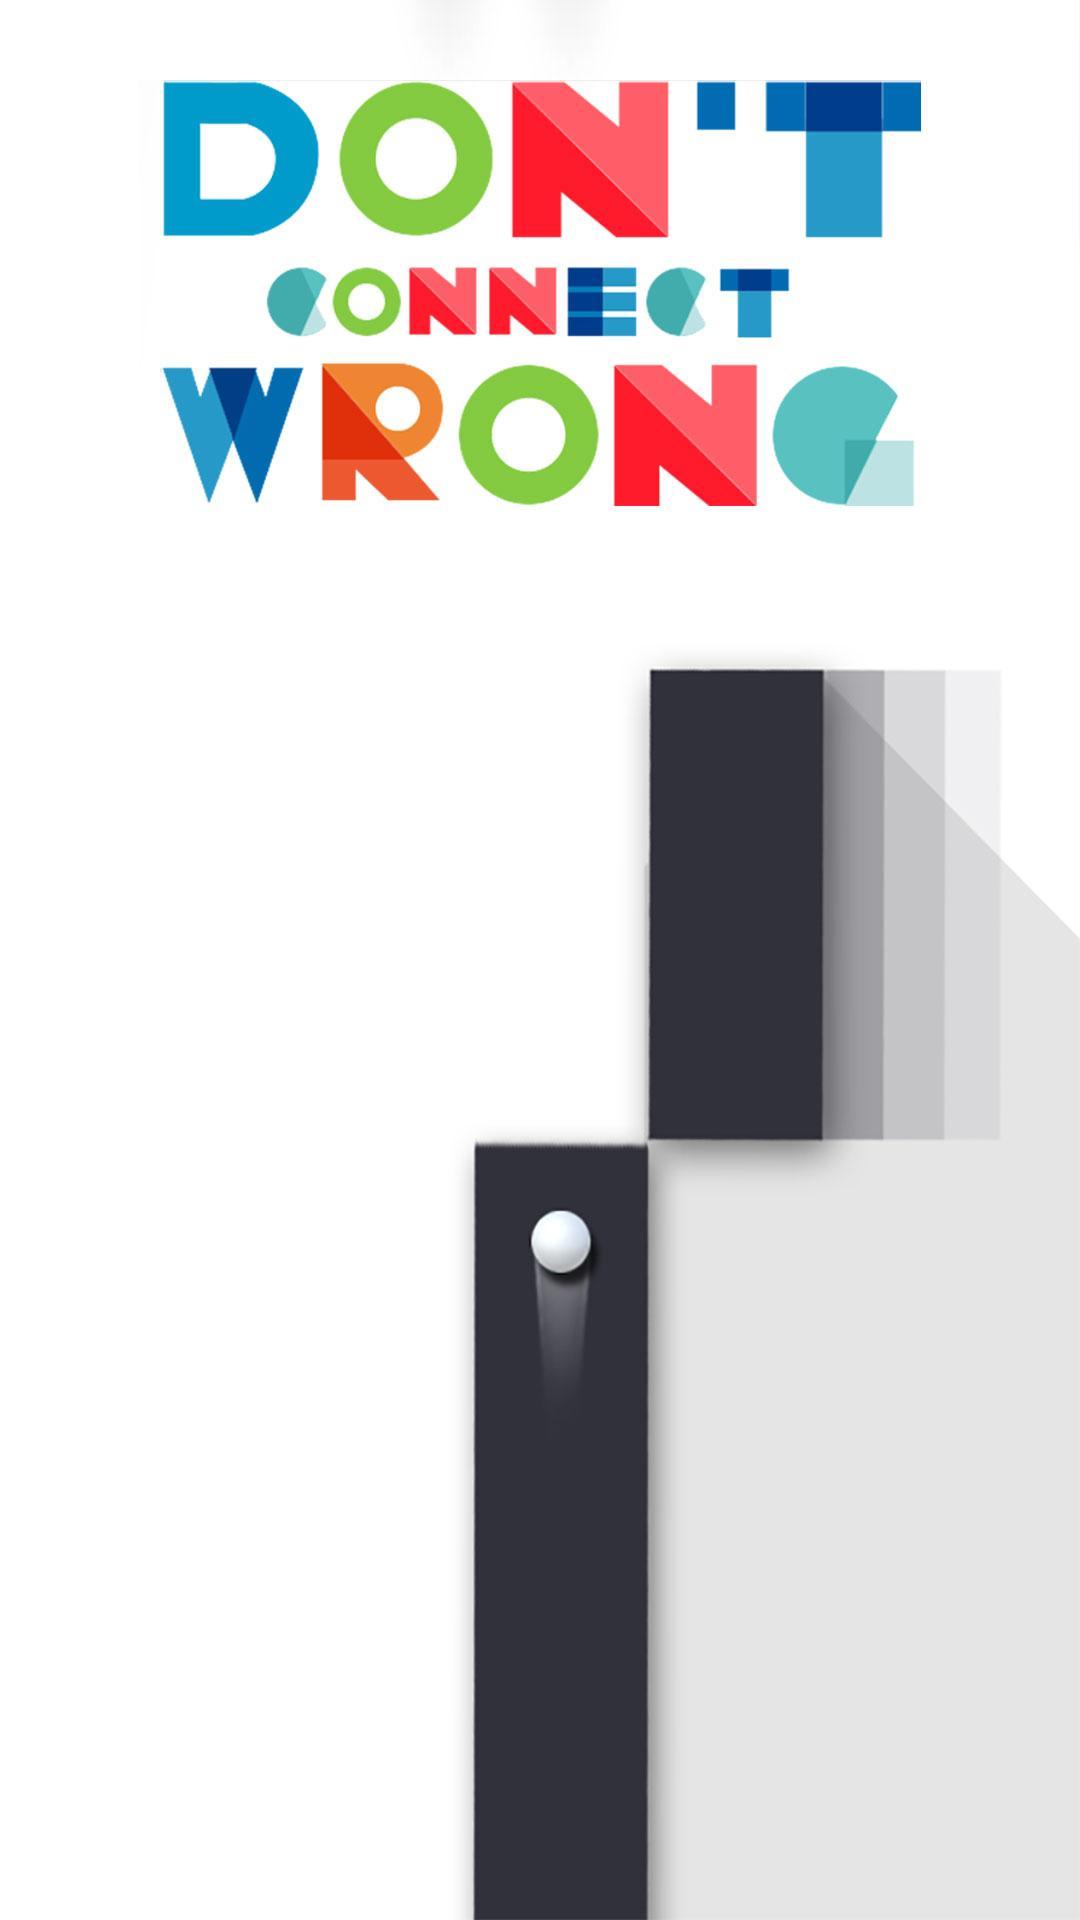 Don't connect wrong it！のキャプチャ